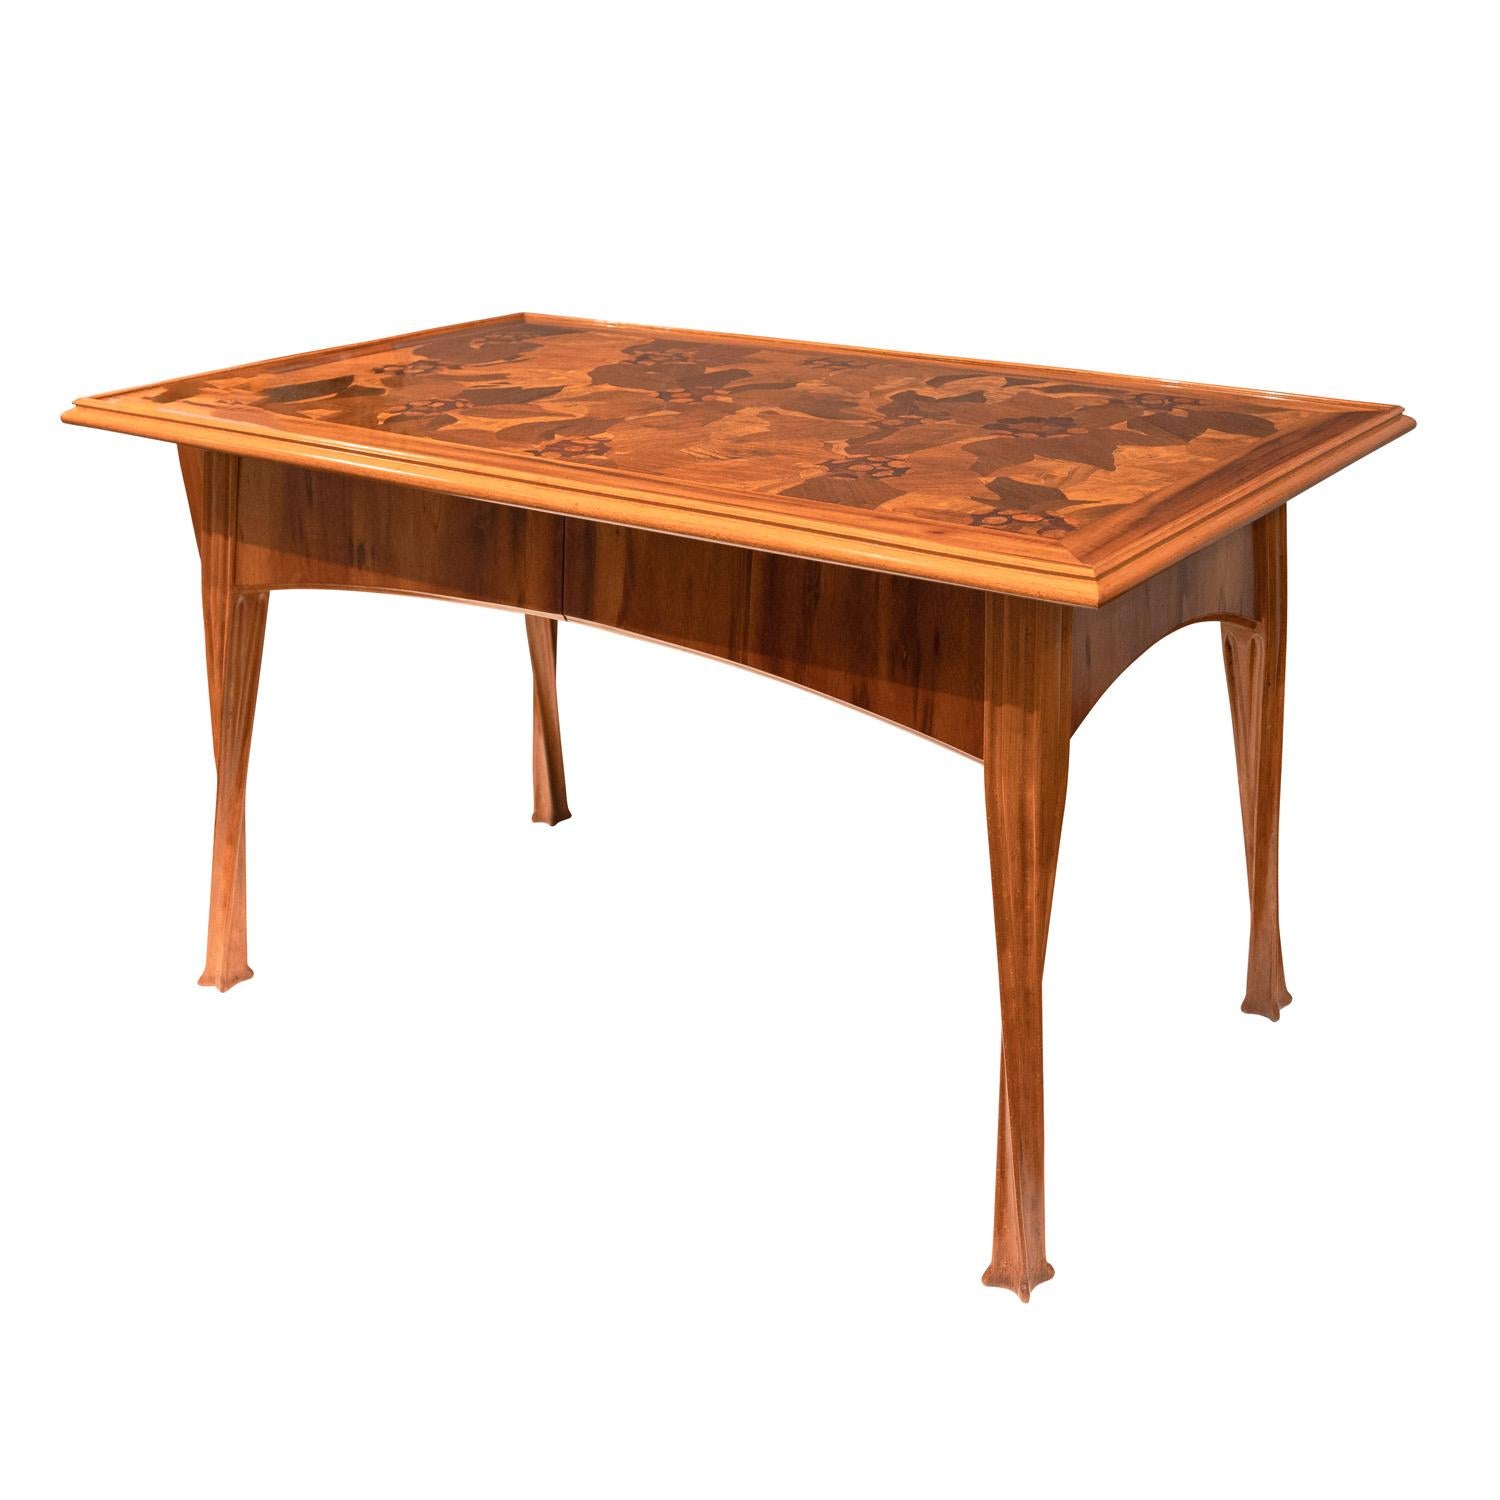 Art Nouveau Louis Majorelle Rare Writing Desk with Botanical Inlays ca. 1900 (Signed) For Sale